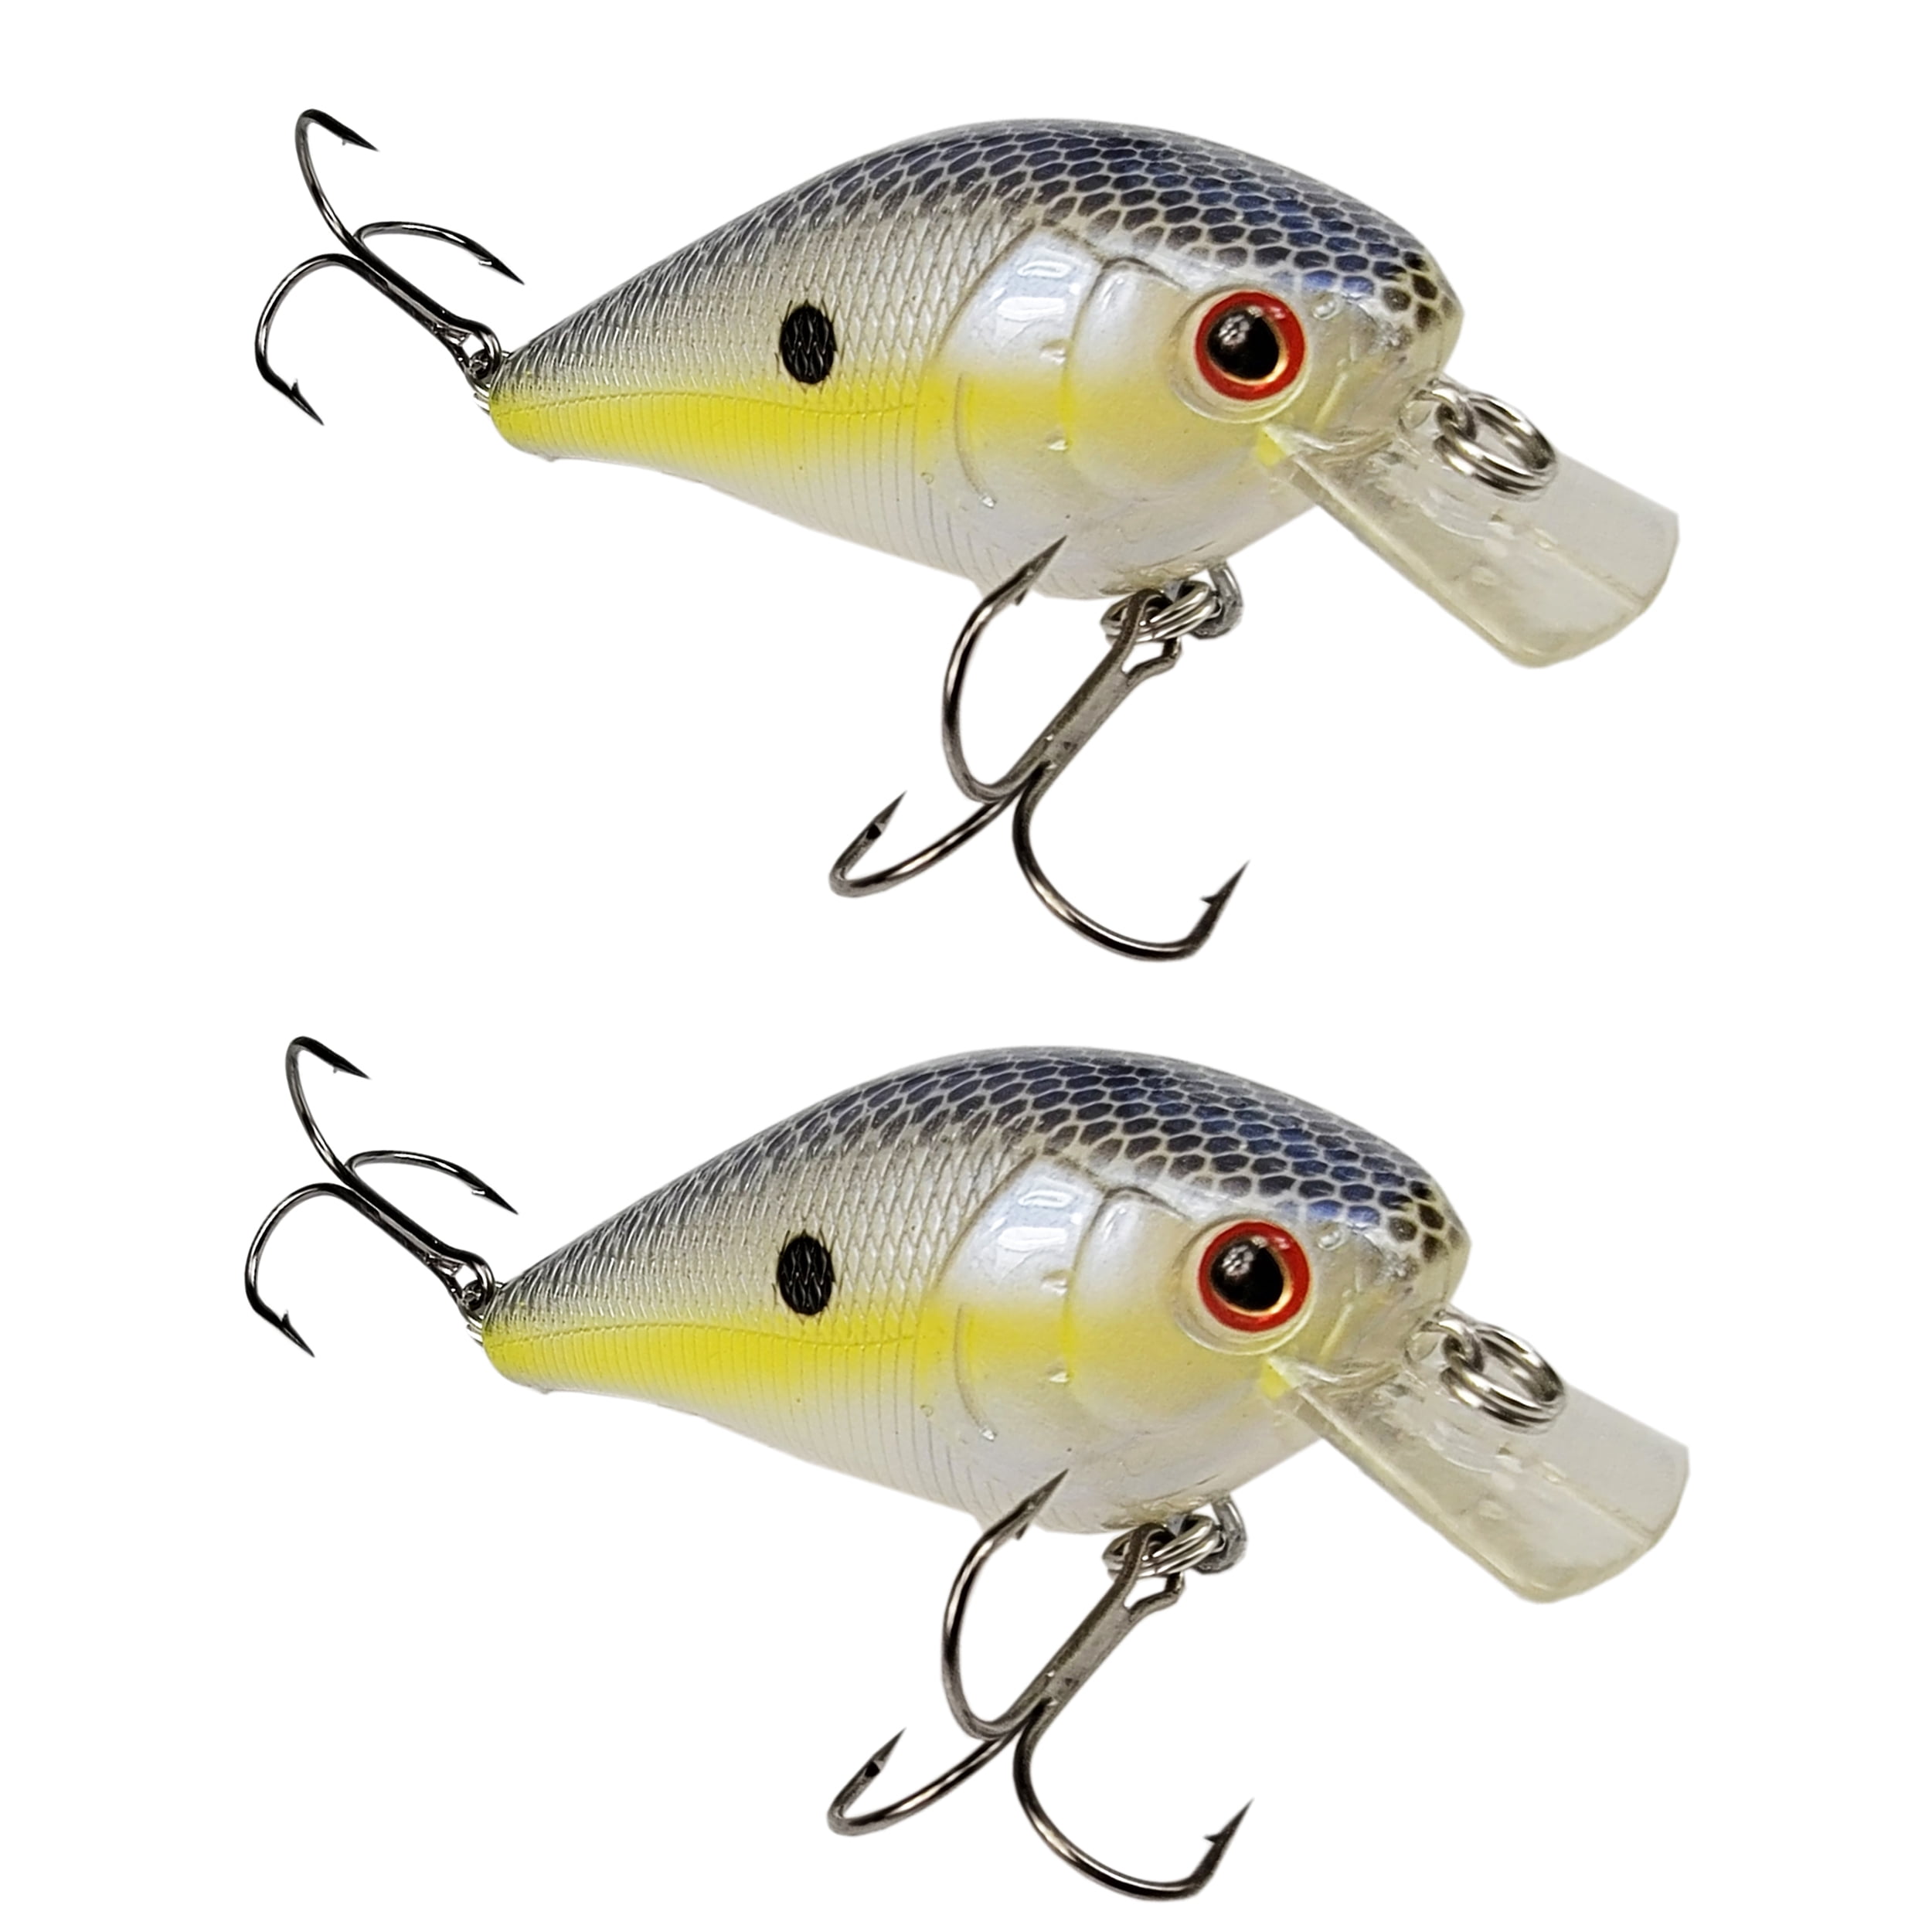 Tackle HD 2-Pack Square Bill Crankbait, 2.75 Lipped Rattle